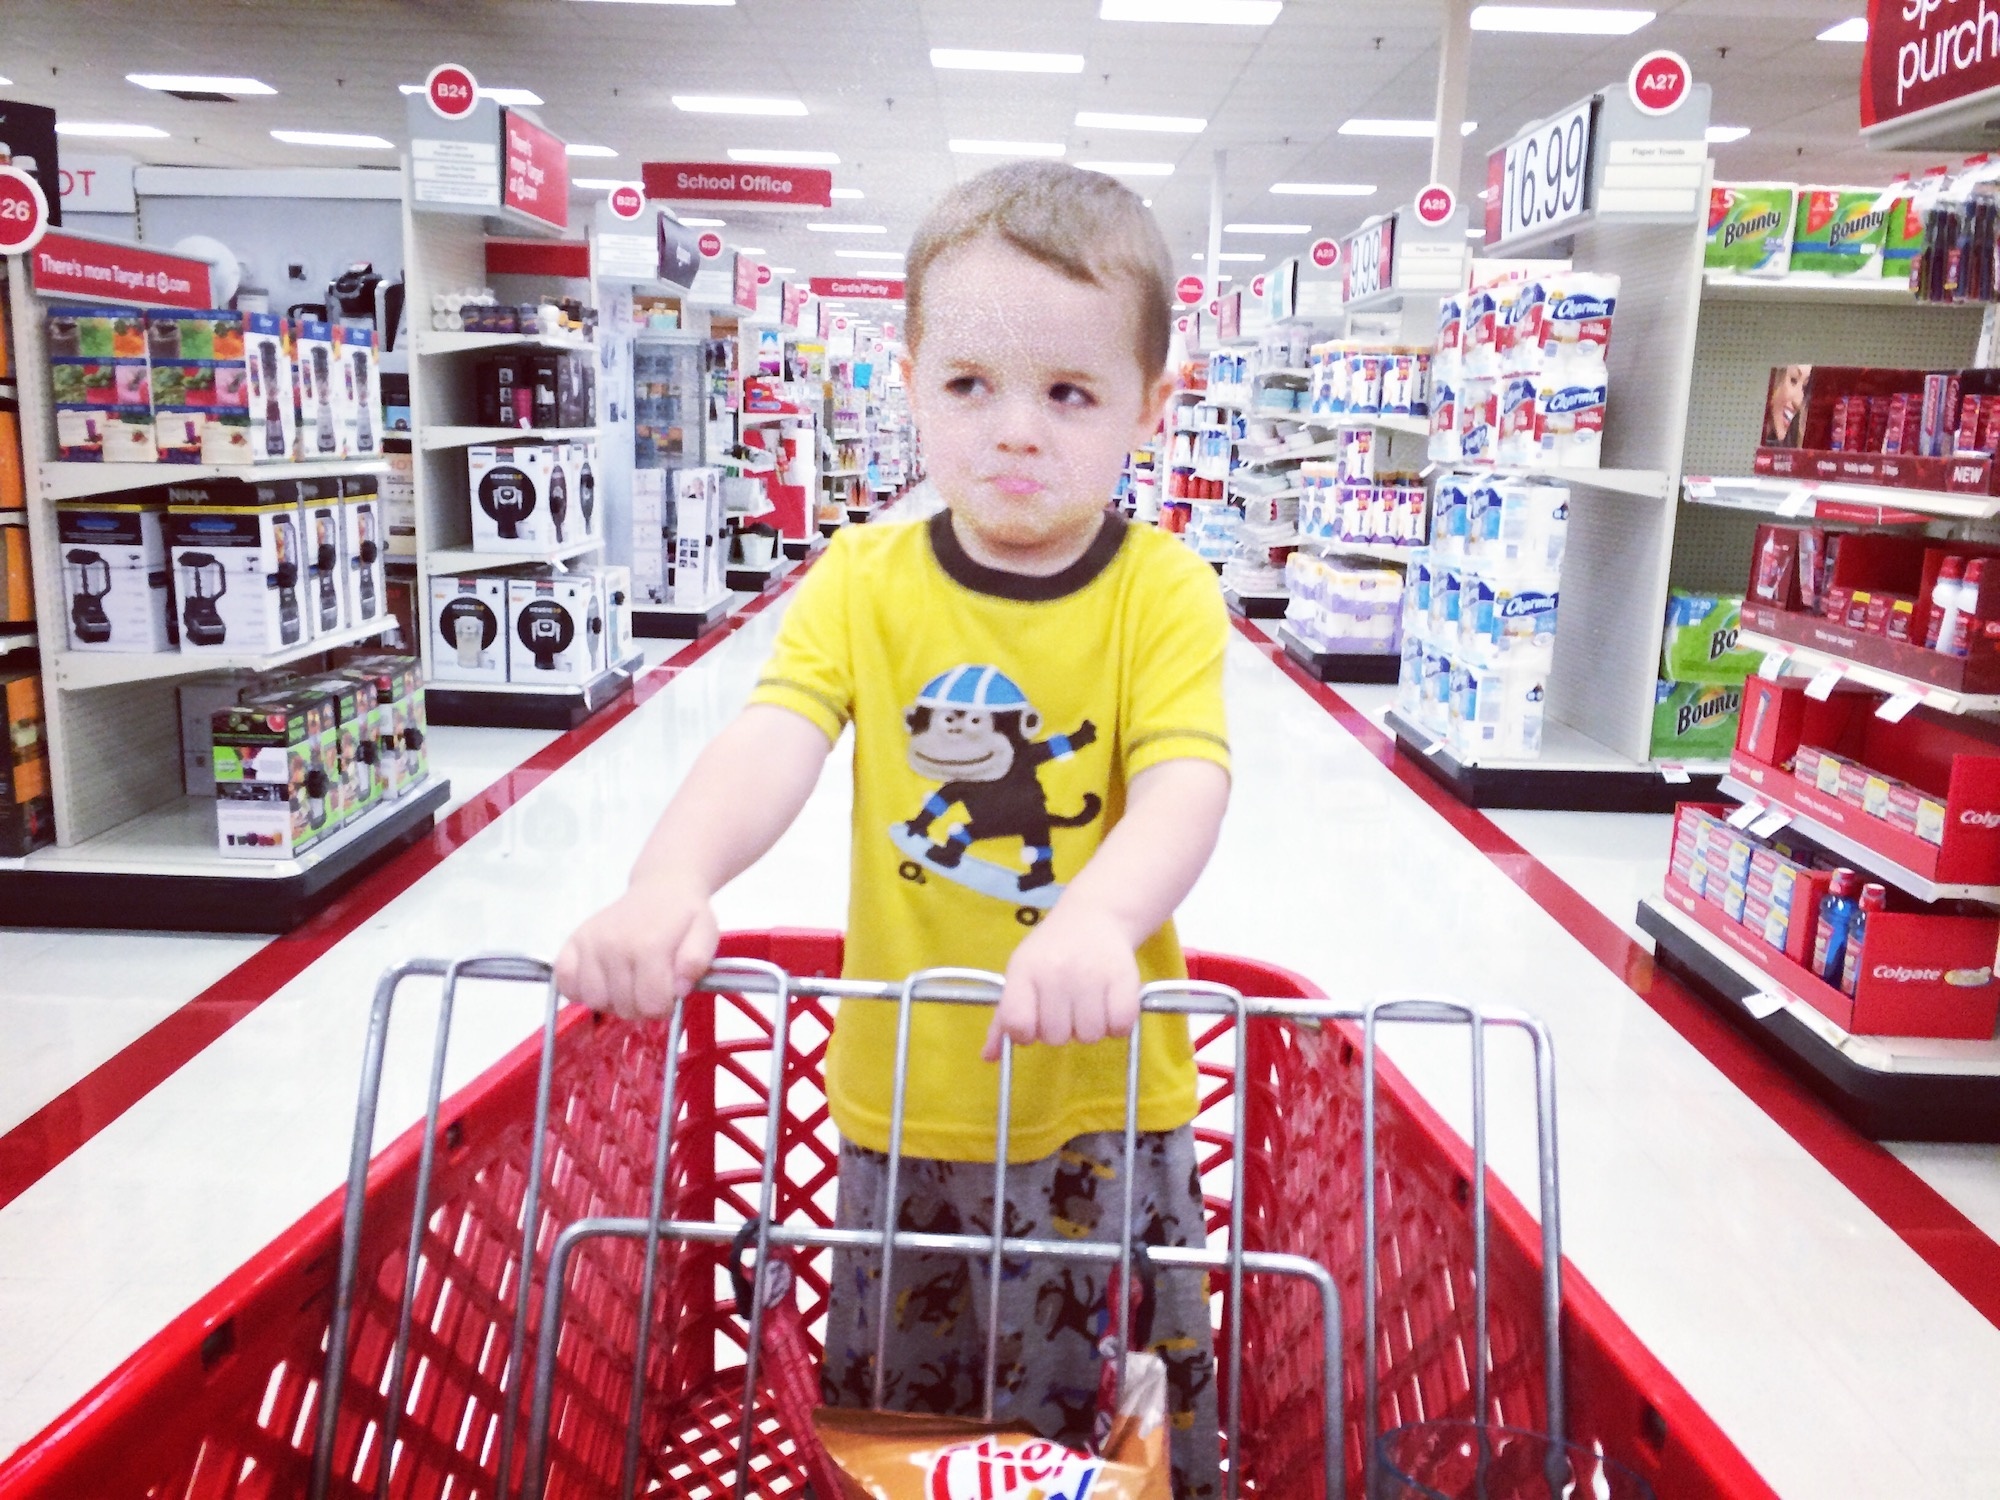 https://www.mother.ly/wp-content/uploads/2018/10/mom-supporting-mom-toddler-tantrum-at-target-featured.jpg